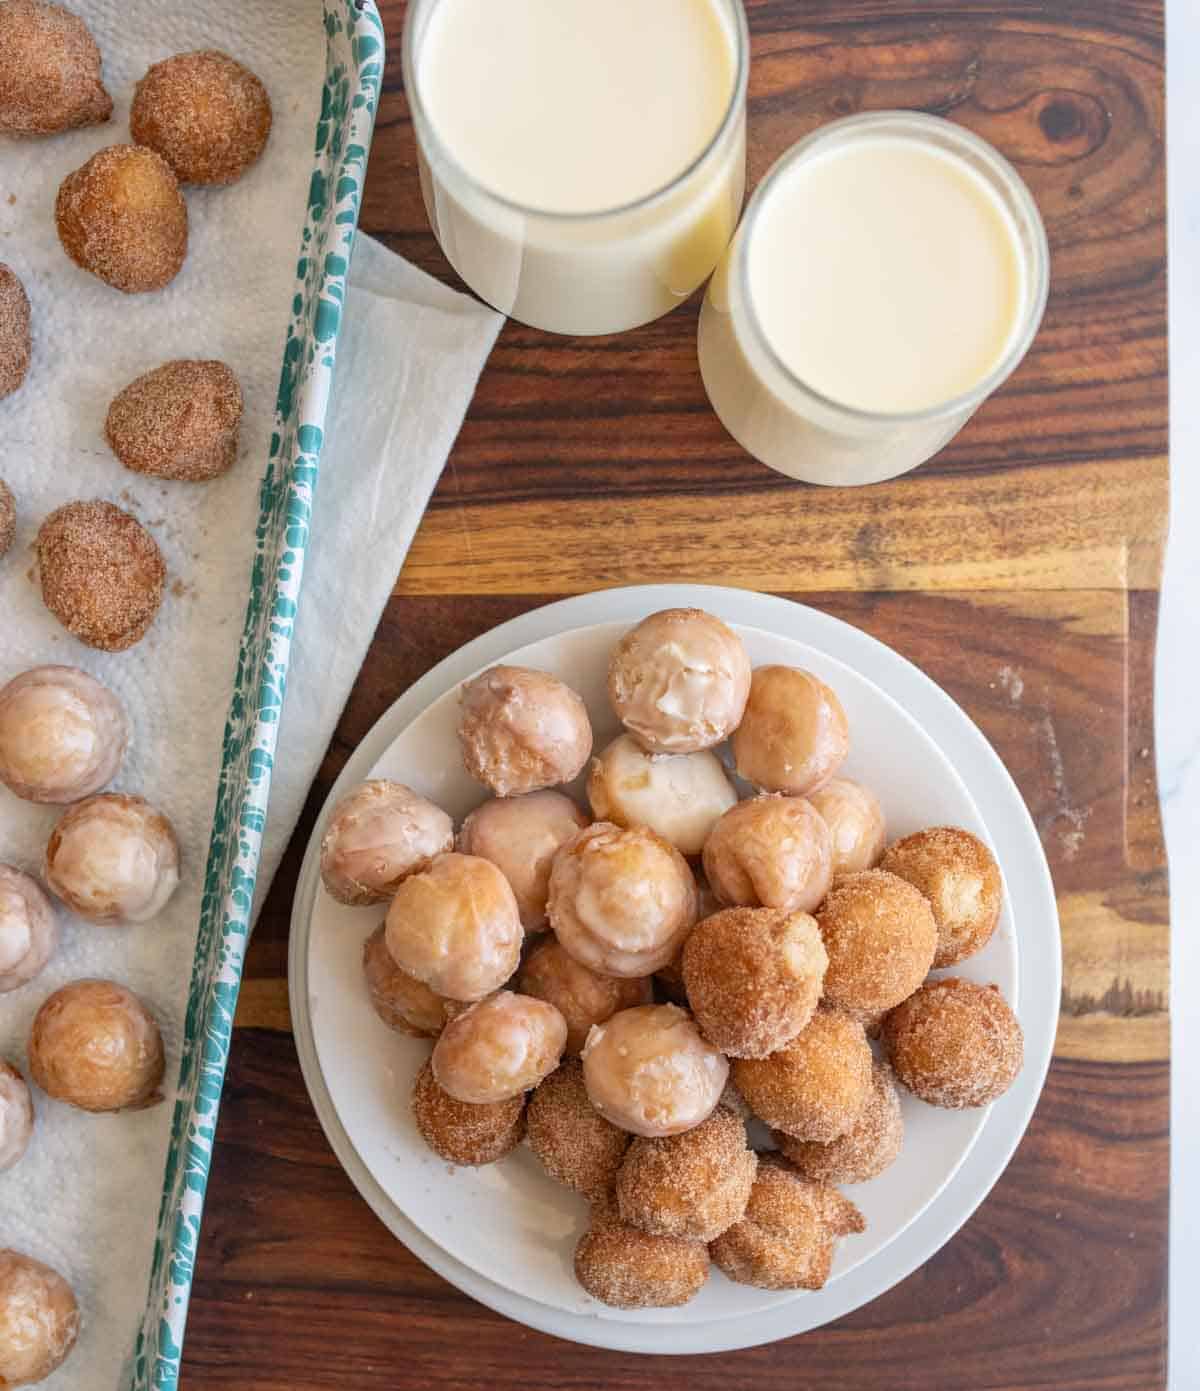 top view of a plate stacked with round iced and sugar donut hole bites with glasses of milk